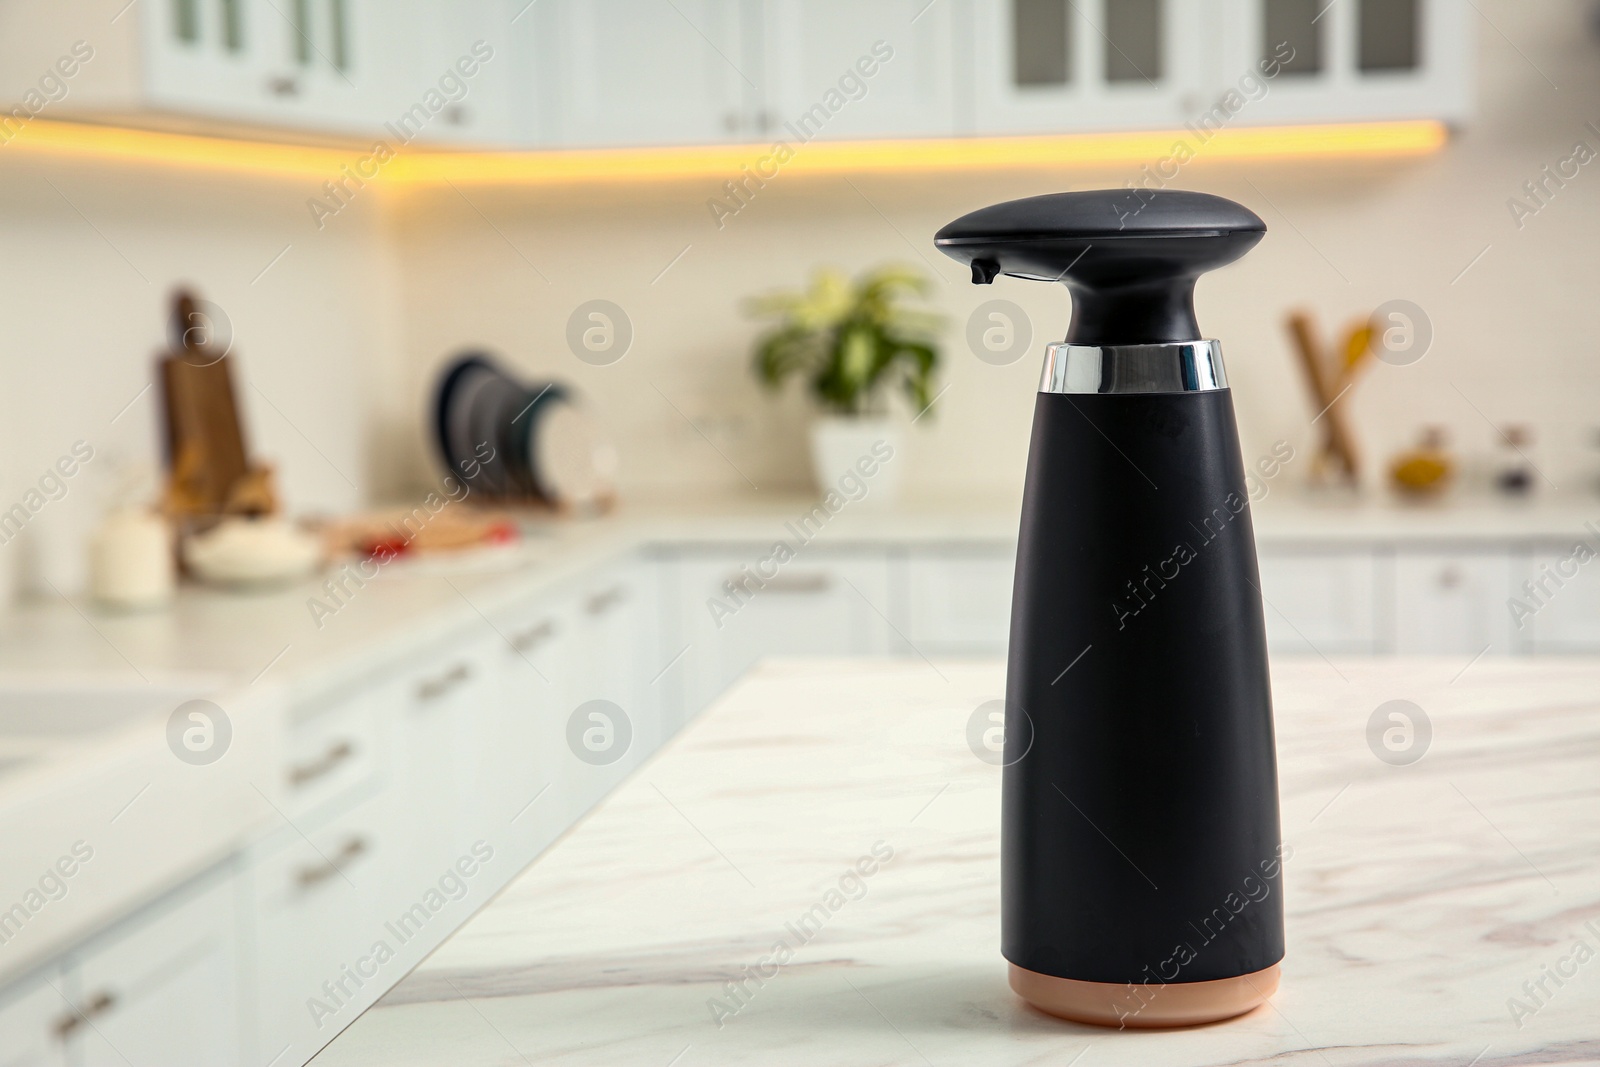 Photo of Modern automatic soap dispenser on countertop in kitchen. Space for text